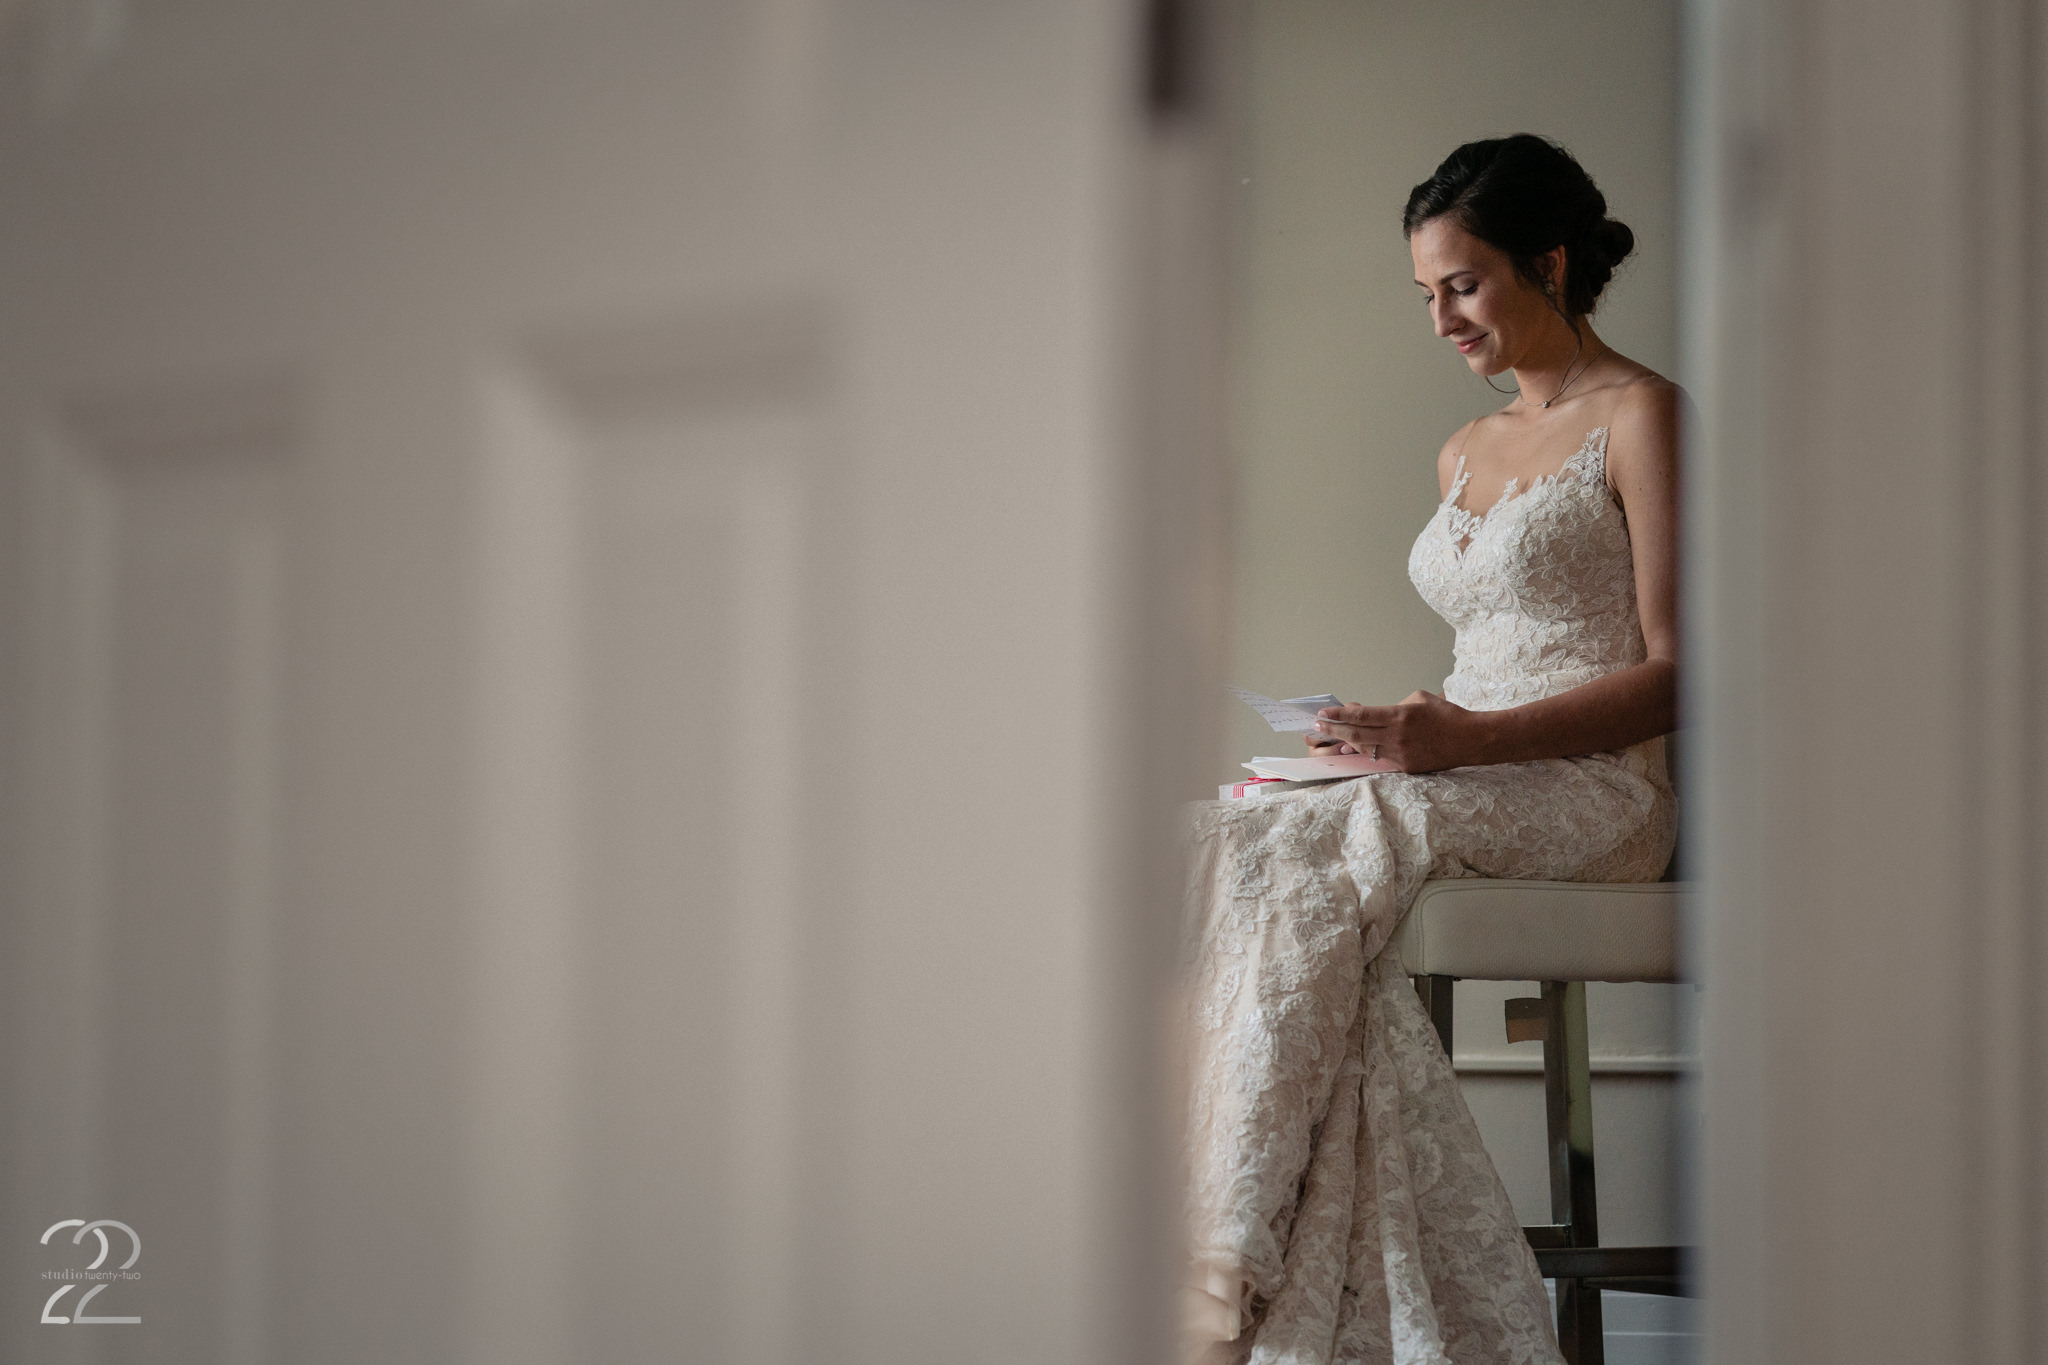  Studio 22 wants to capture those quiet moments for you to look back on. Here Morgan was taking a minute to herself to read the letter from Caleb before her ceremony at French Park in Cincinnati. 